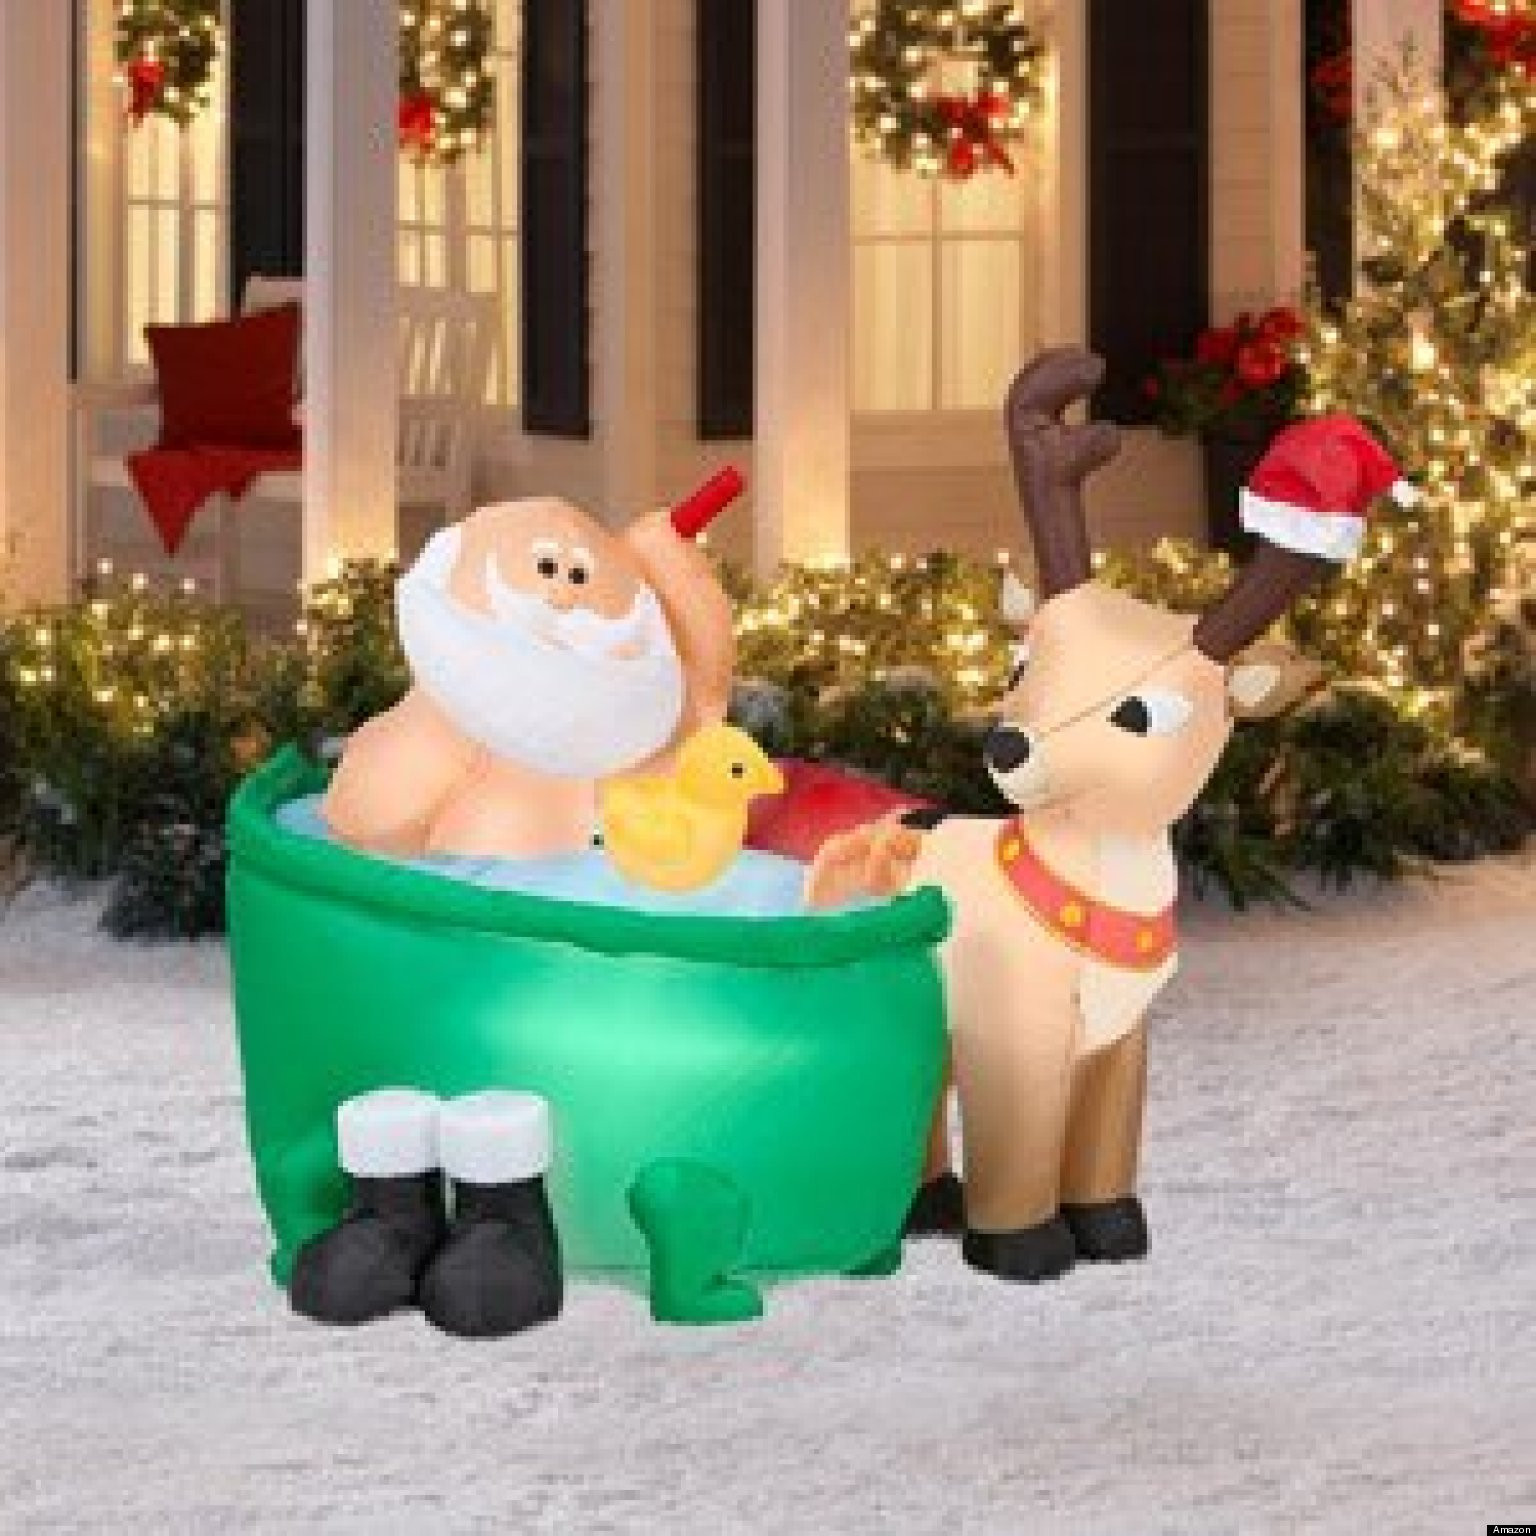 Outdoor Christmas Inflatables
 Worst Inflatable Christmas Decorations PHOTOS